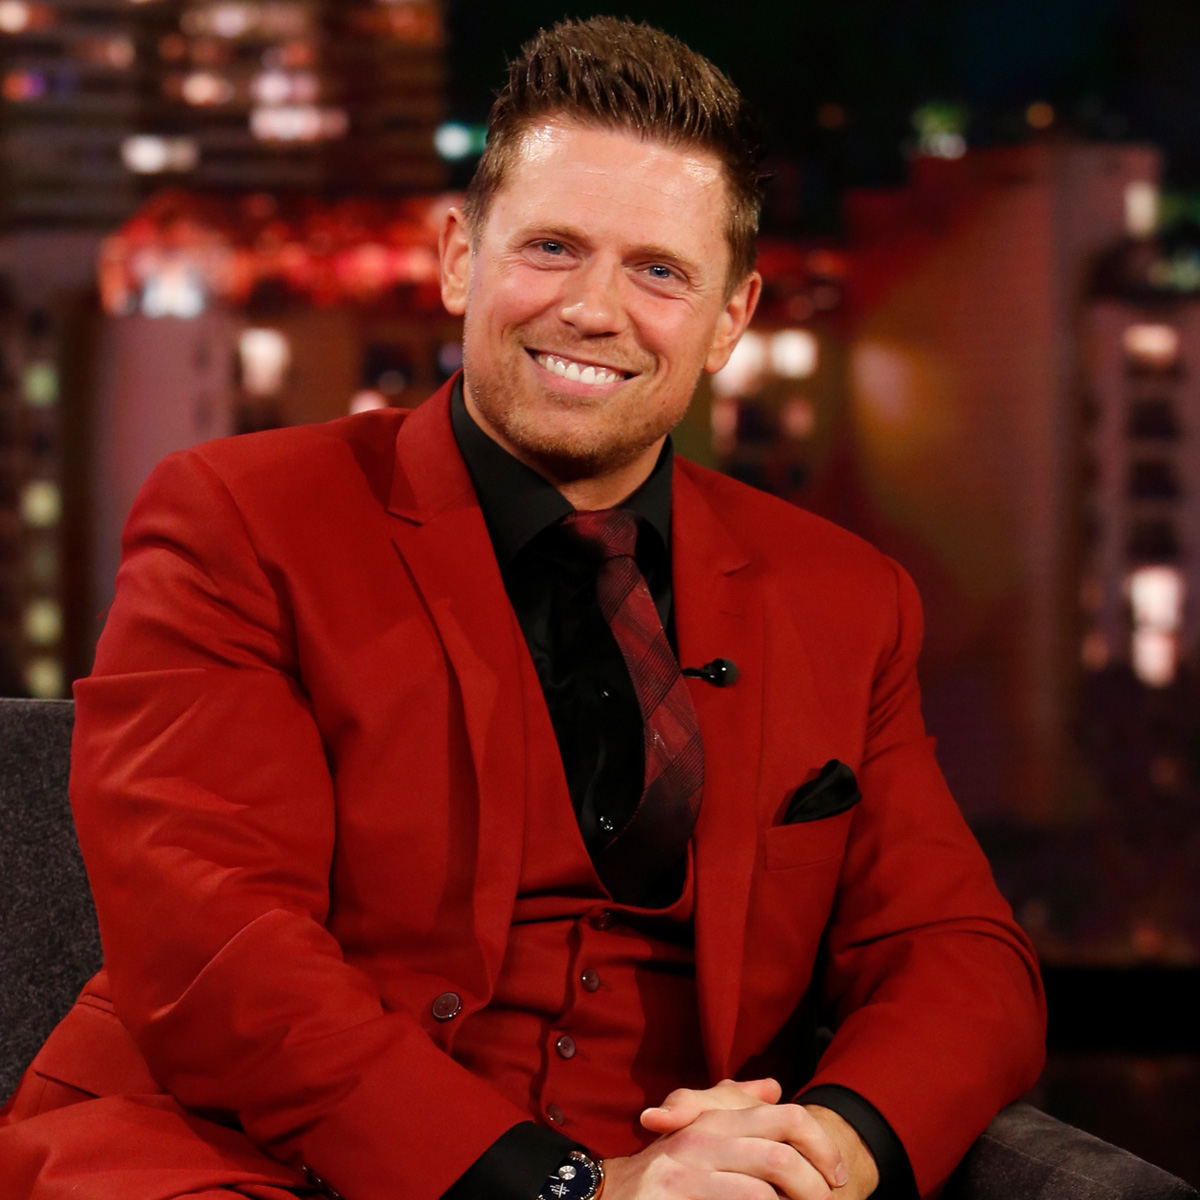 MLB All-Star Game: Mike 'The Miz' Mizanin is a one man traveling